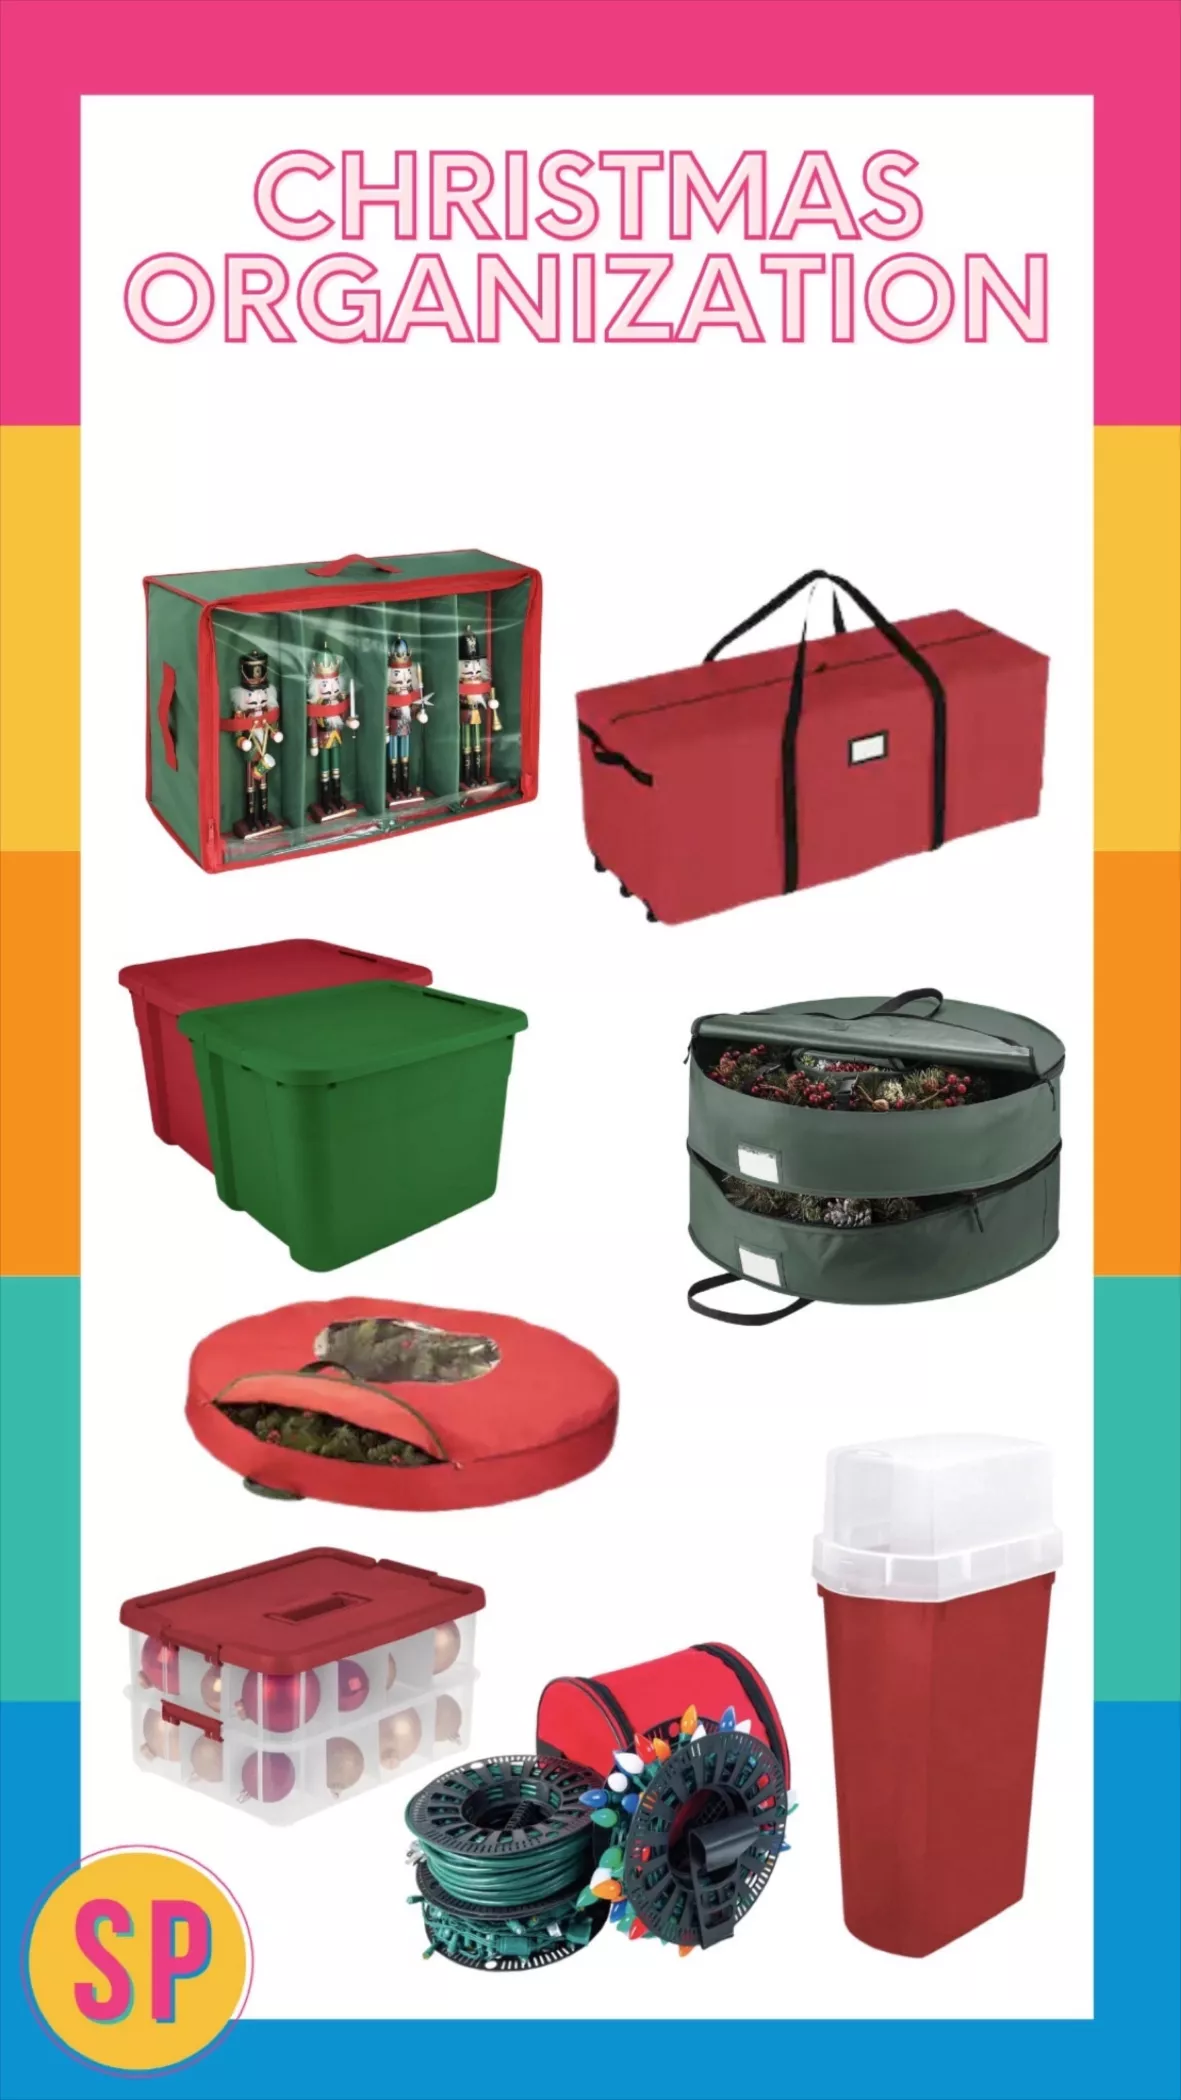 Honey-Can-Do Red and Green Plastic Ornament Storage Box (48